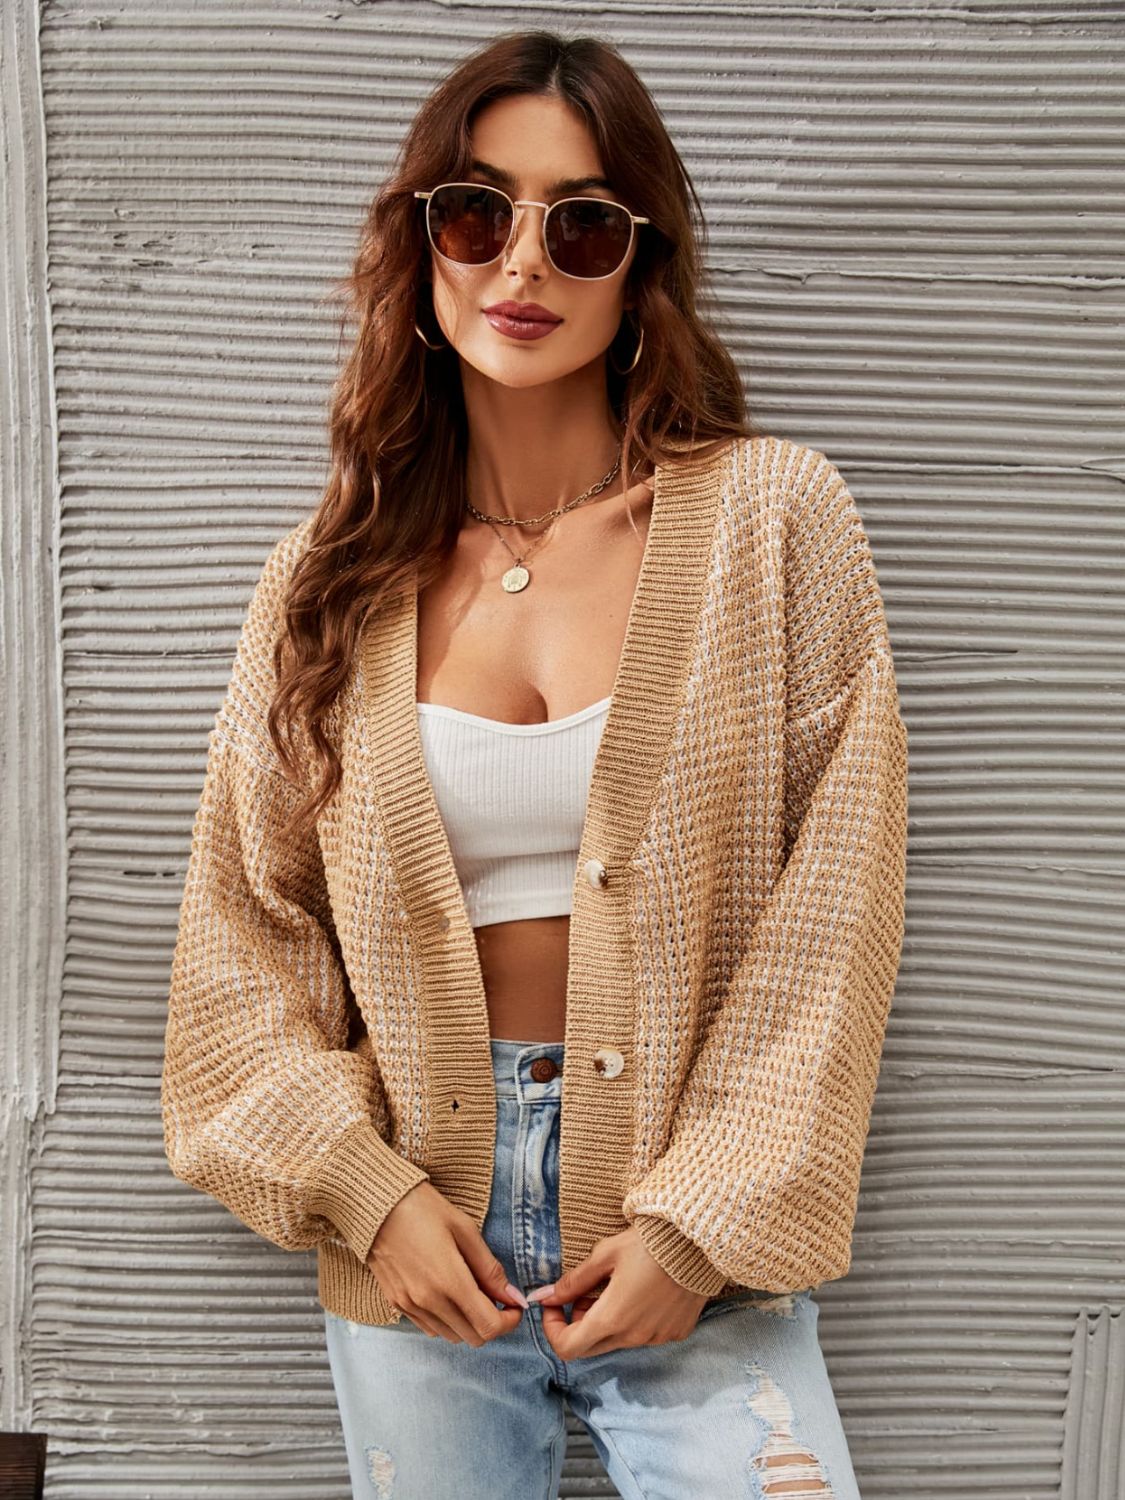 V-Neck Dropped Shoulder Cardigan - Beige / S - Women’s Clothing & Accessories - Shirts & Tops - 4 - 2024